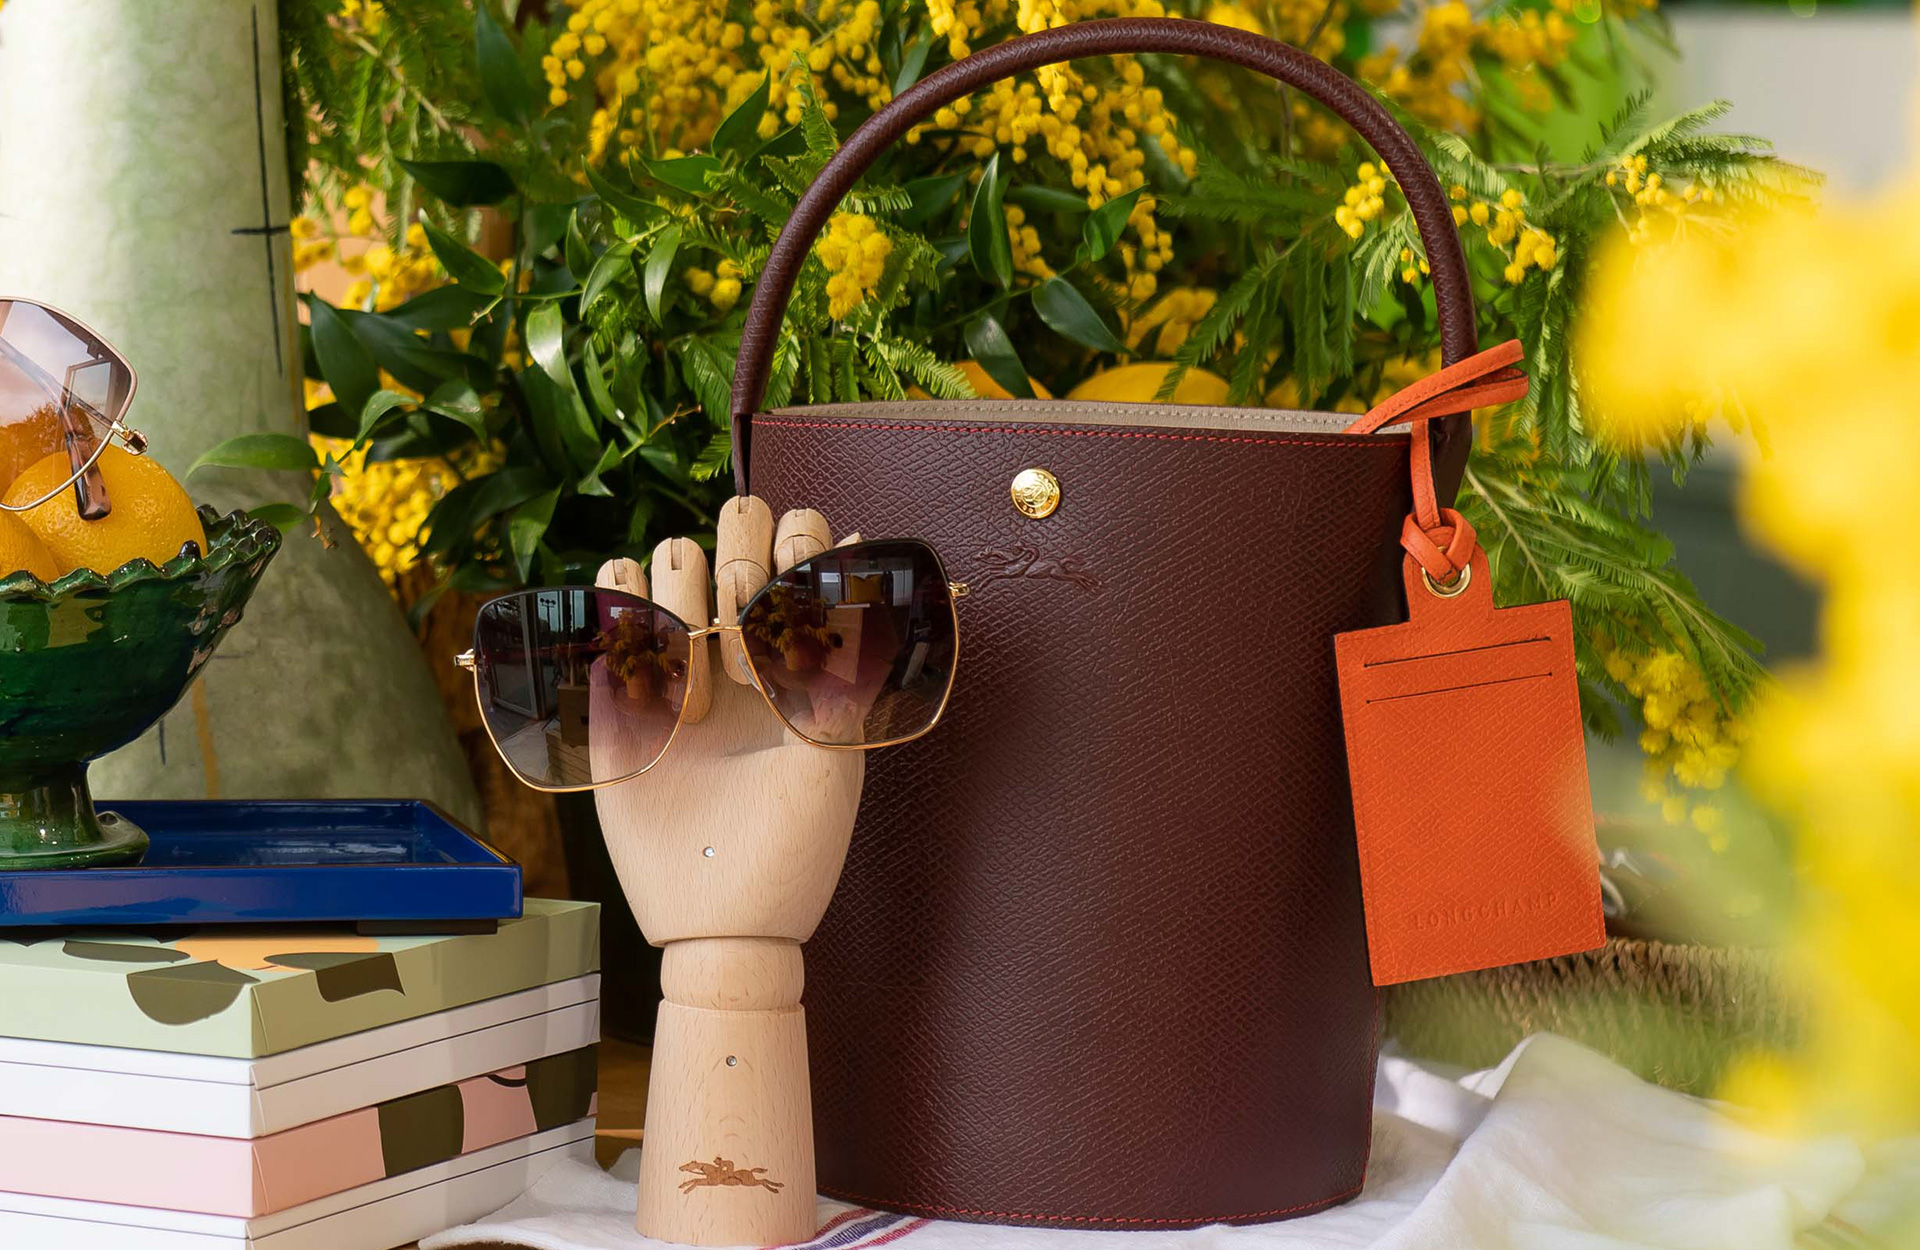 Longchamp on X: For inspiration, look no further than the newest